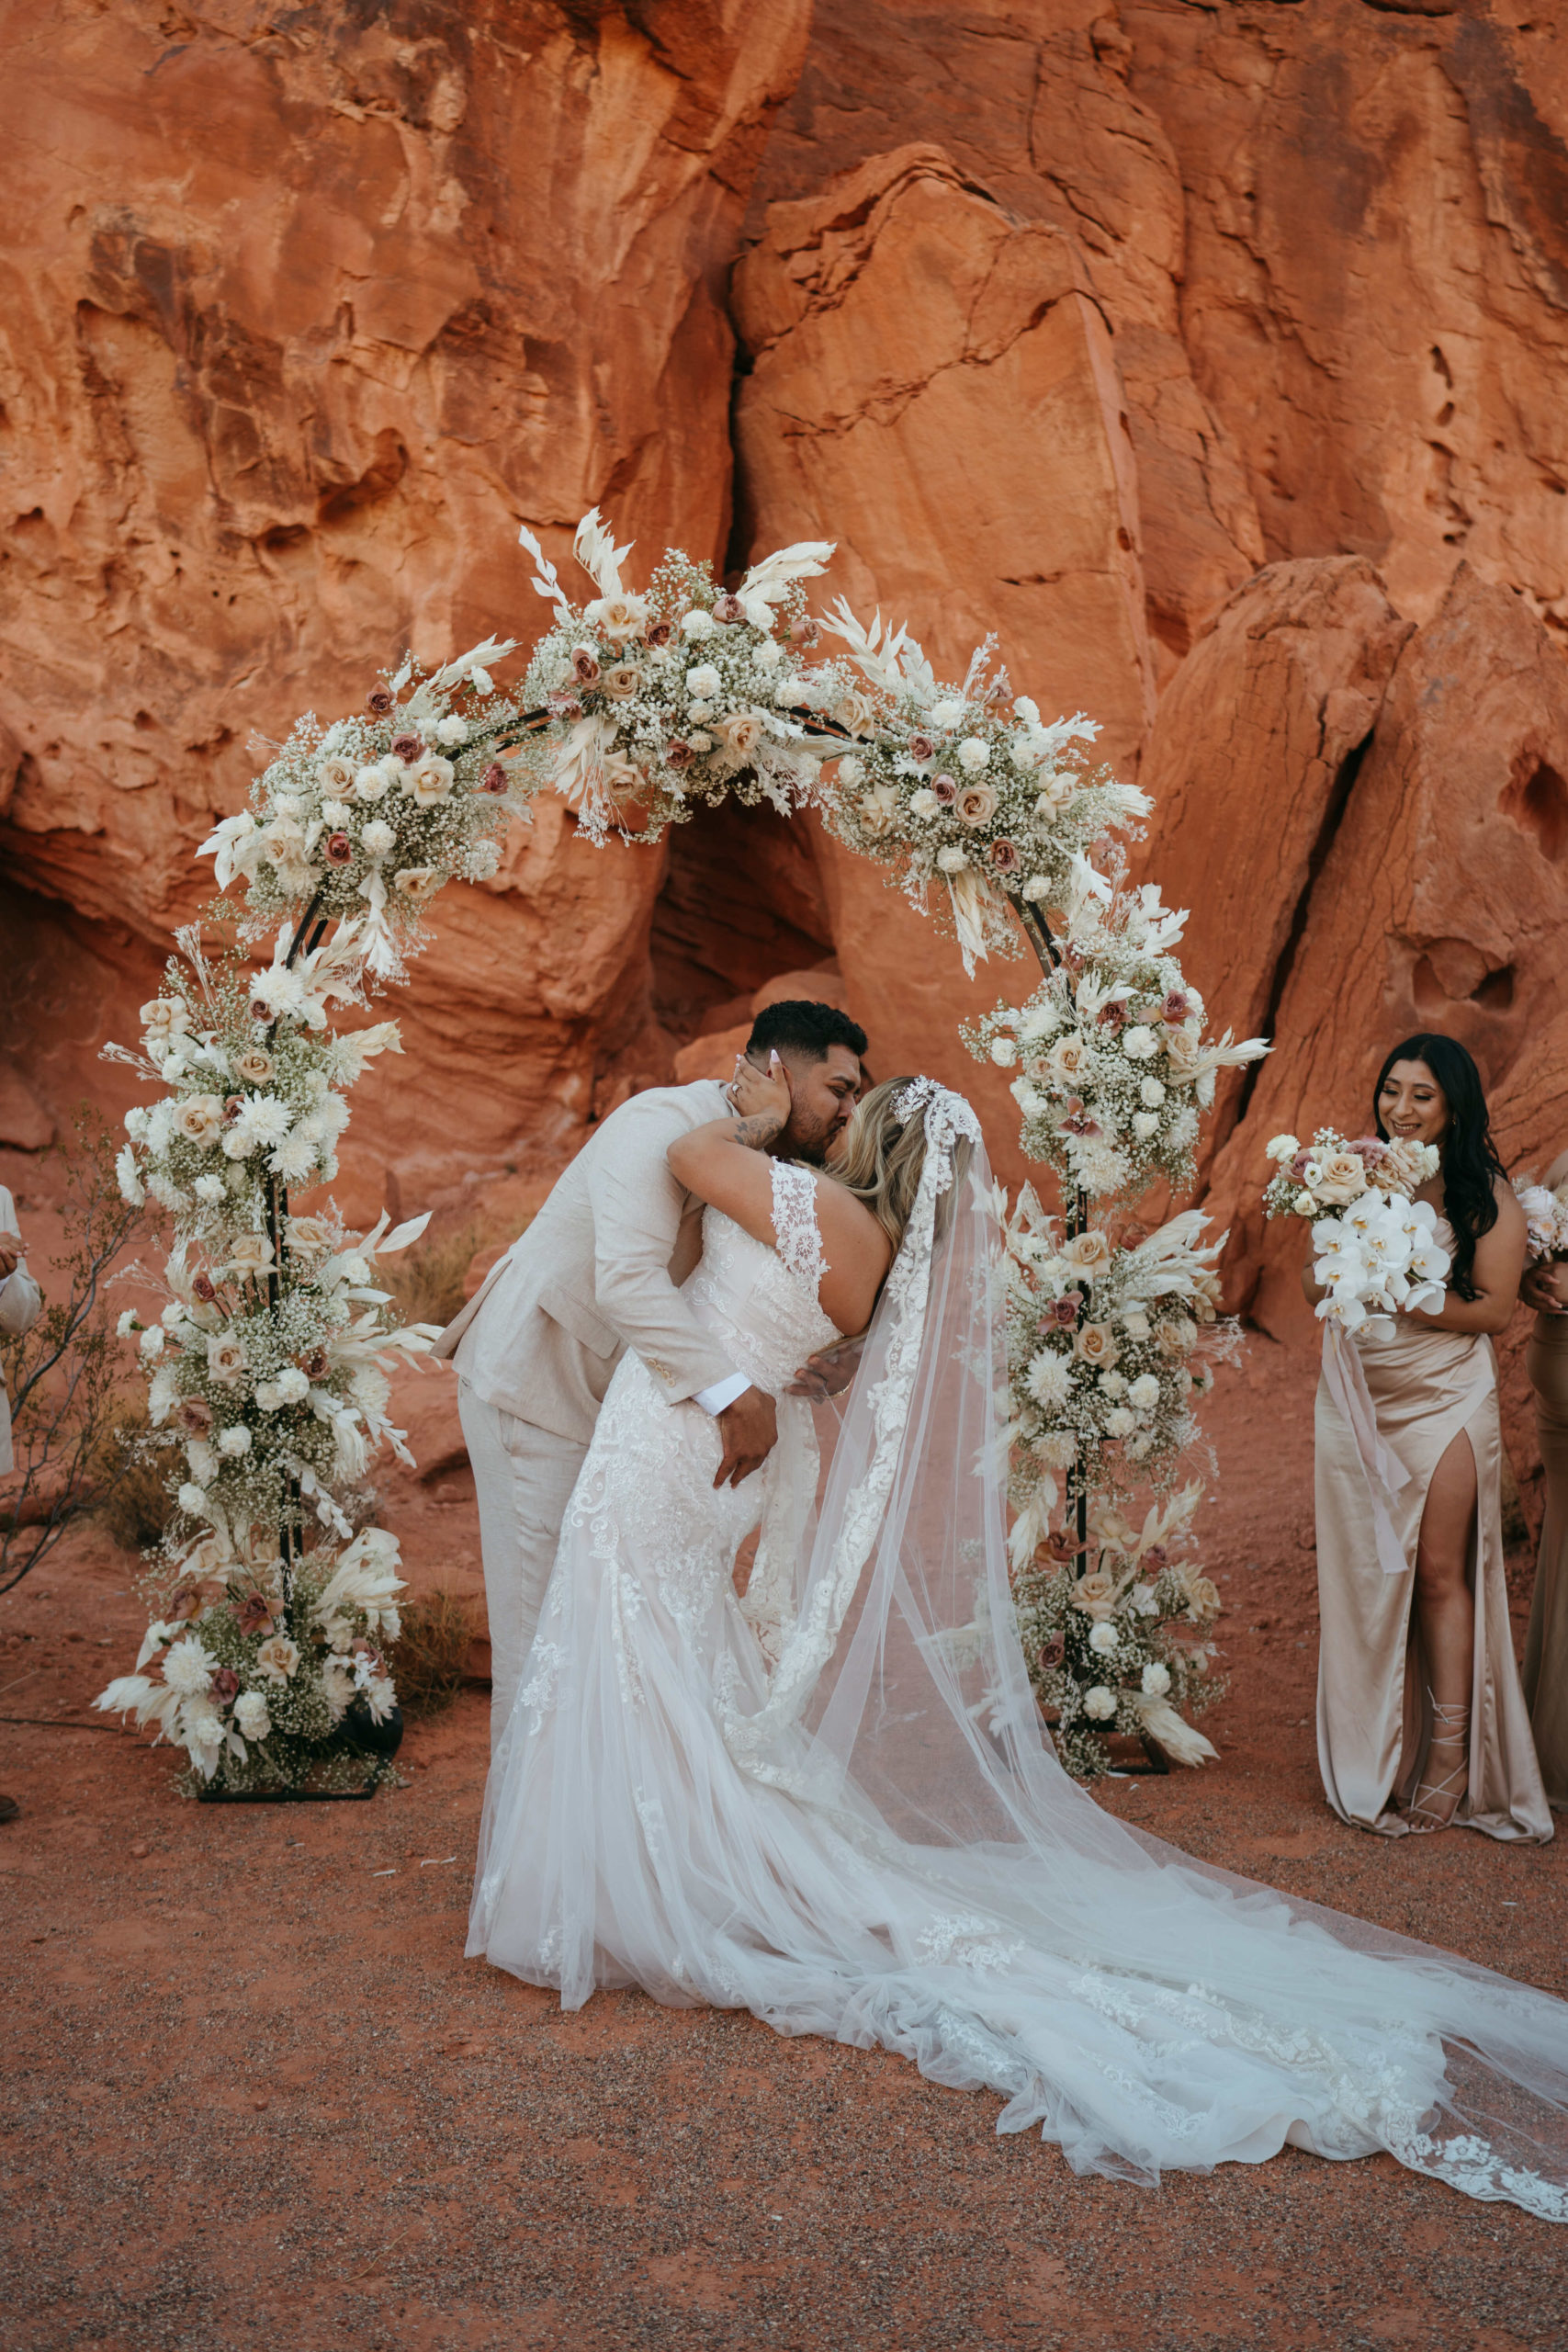 Modern Monochromatic Desert Micro-Wedding. The groom dips the bride at the floral arch altar for their first kiss as a married couple